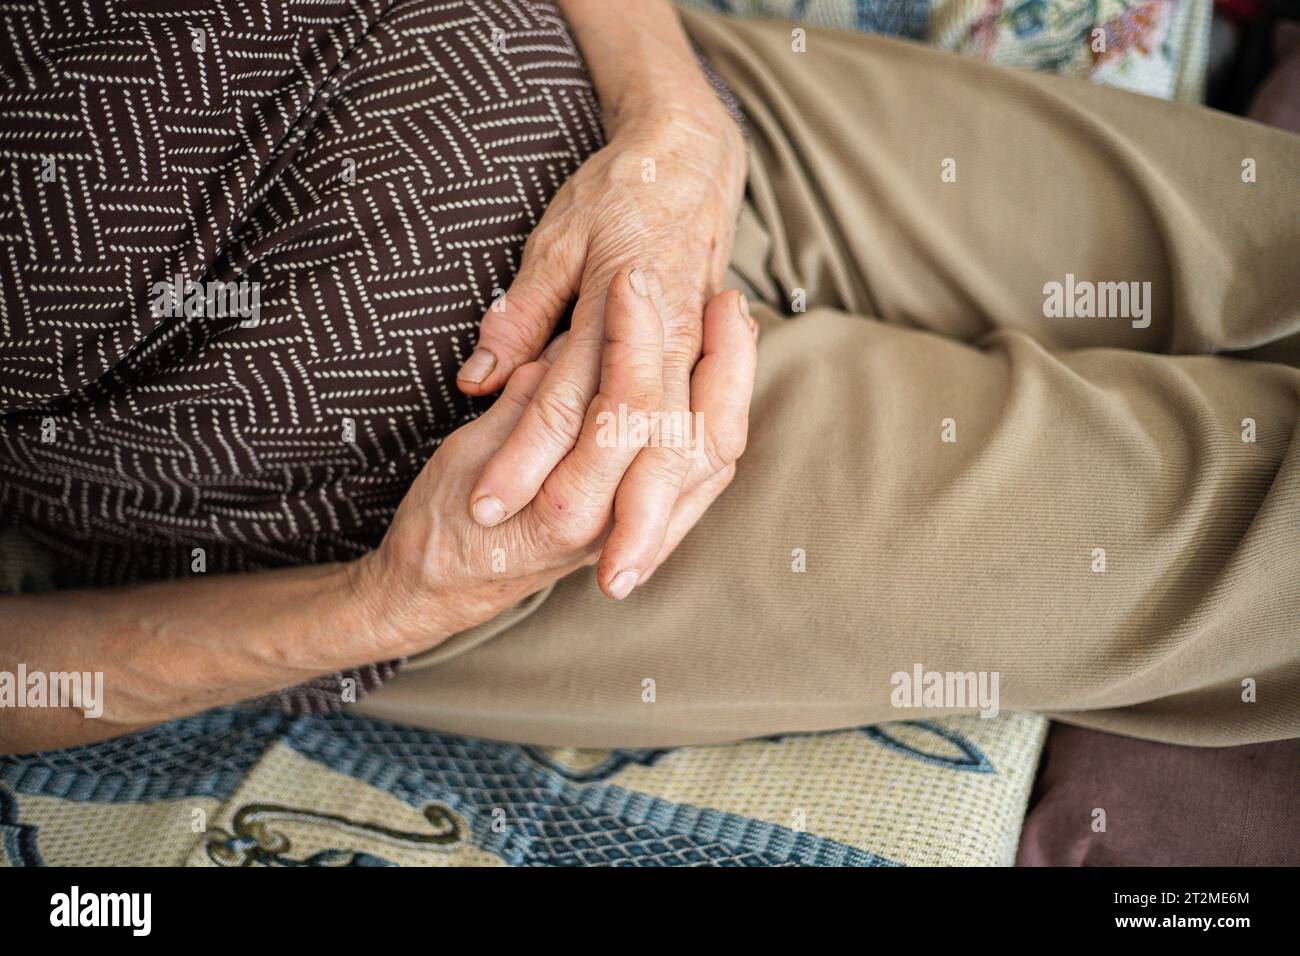 Hands of the elderly person. Highlight of senior woman's hands on her belly in the form of rest. Moment of relaxation on the sofa, nap break. Close up Stock Photo